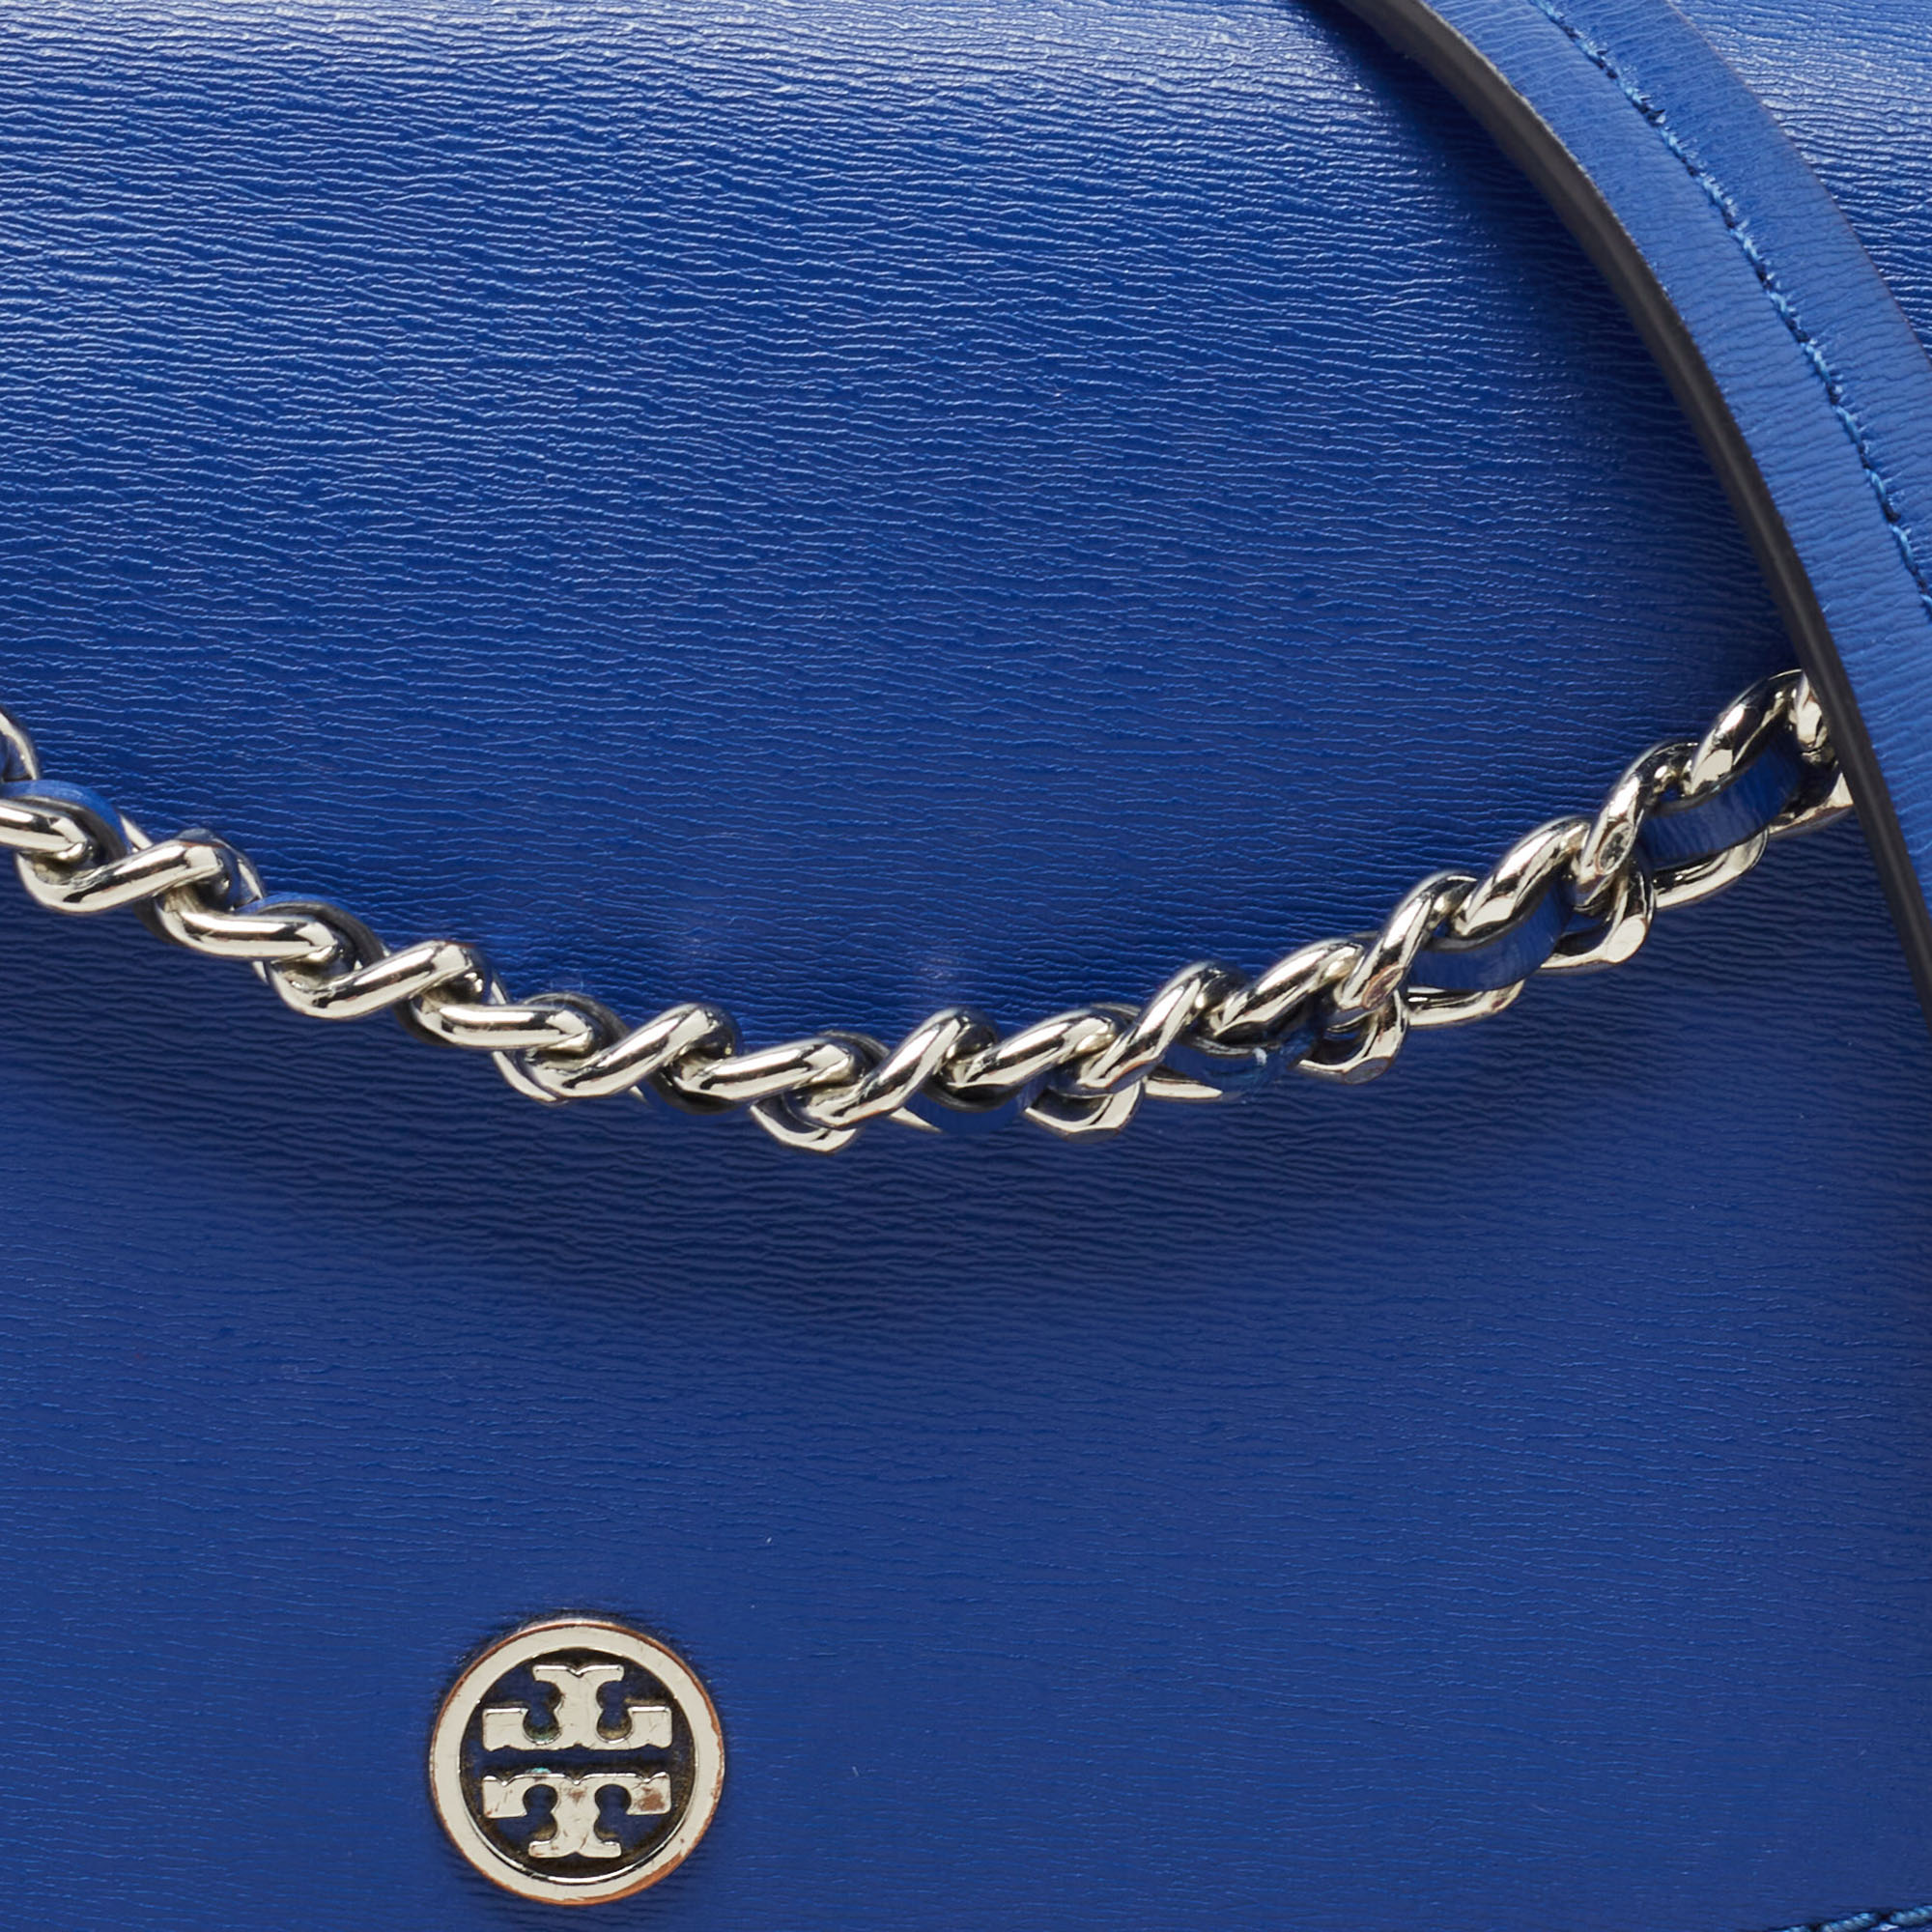 Tory Burch Blue Leather Robinson Convertible Shoulder Bag